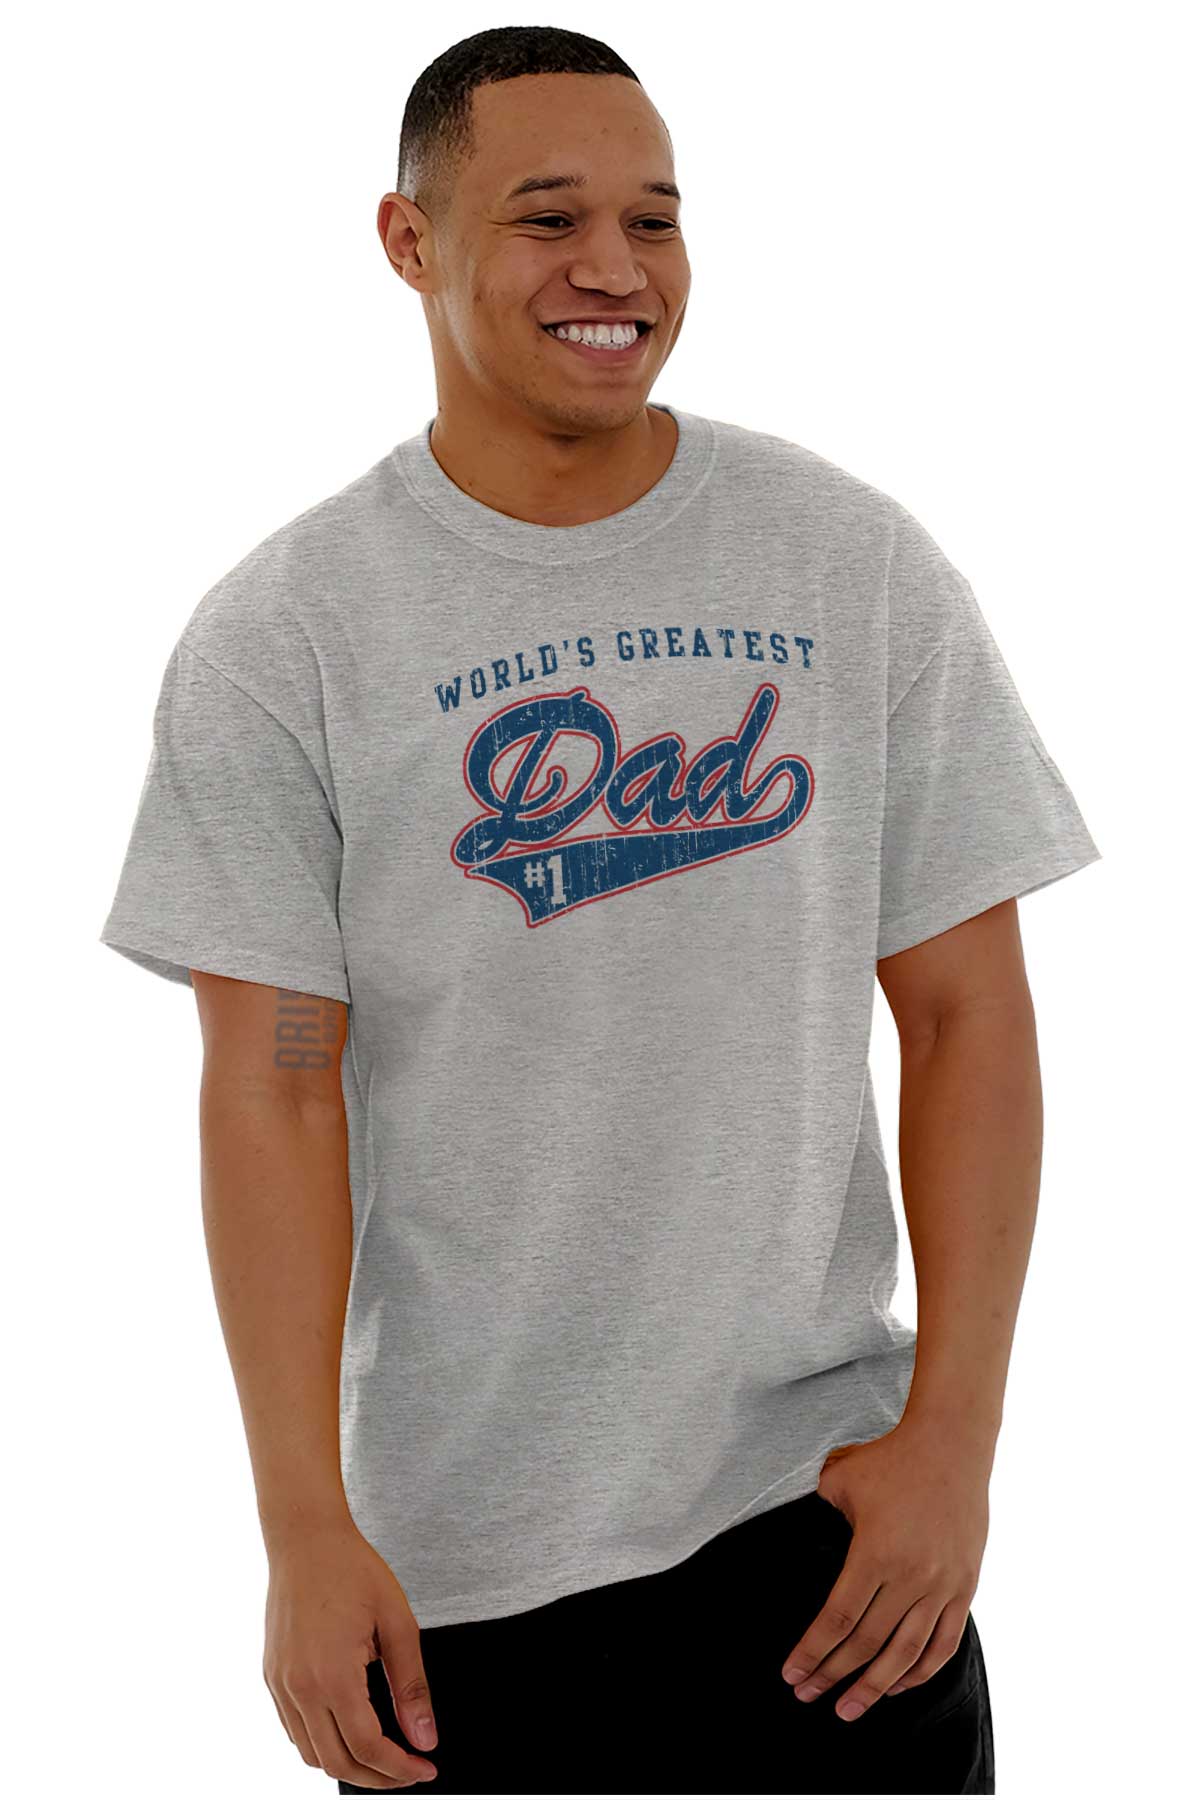 World's Greatest Dad Number 1 Father Men's Graphic T Shirt Tees Brisco Brands S - image 4 of 5